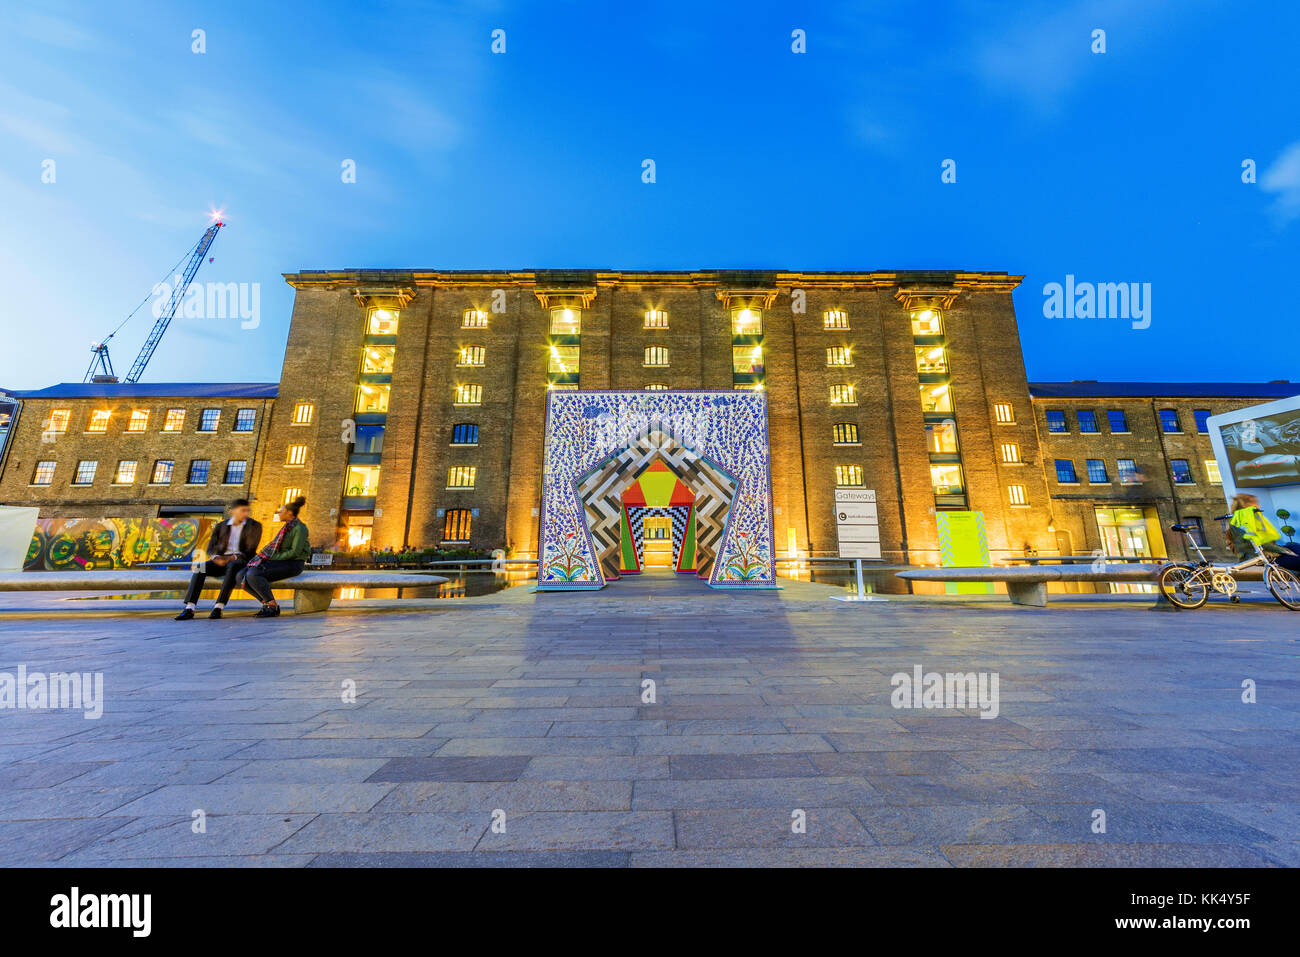 LONDON, UNITED KINGDOM - SEPTEMBER 23: This is a night view of Central Saint Martins university, a famous Arts university in the Kings Cross area on S Stock Photo